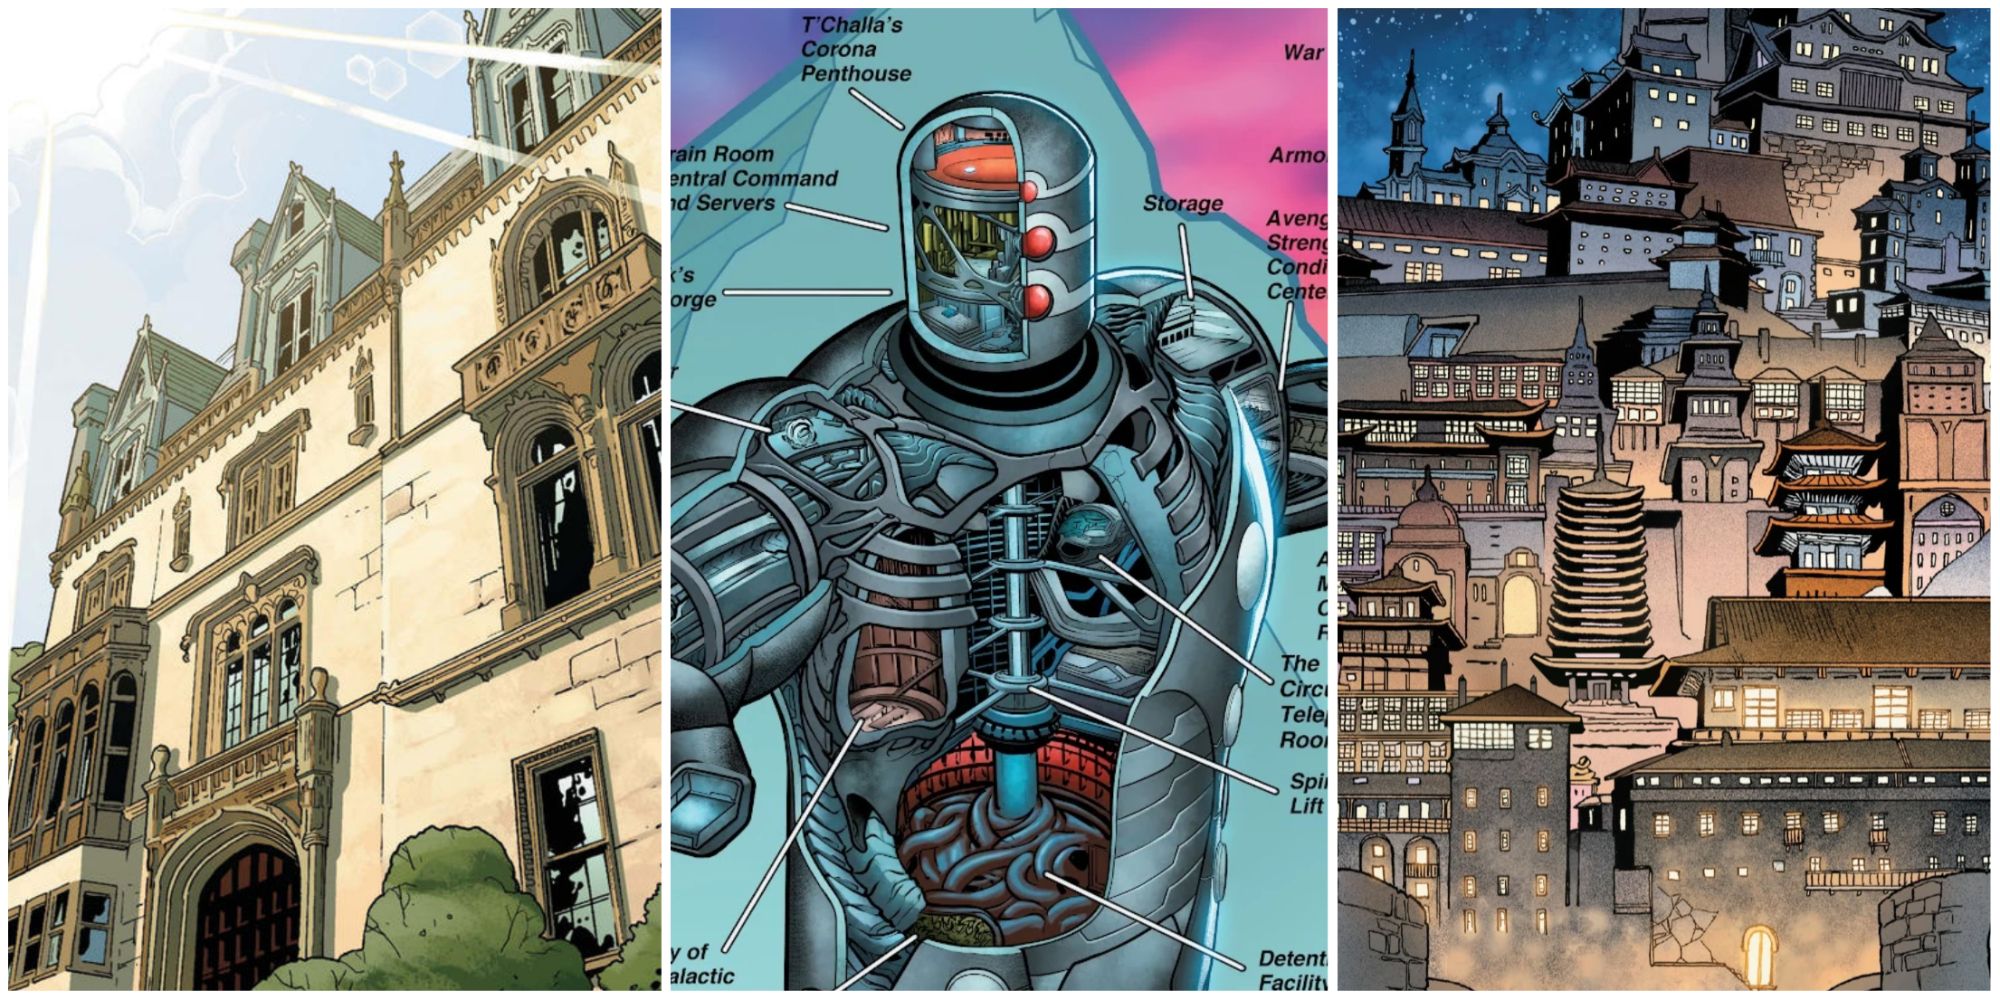 A split image of the Avengers Mansion, cross-section of Avengers Mountain, and Kun-Lun in Marvel Comics